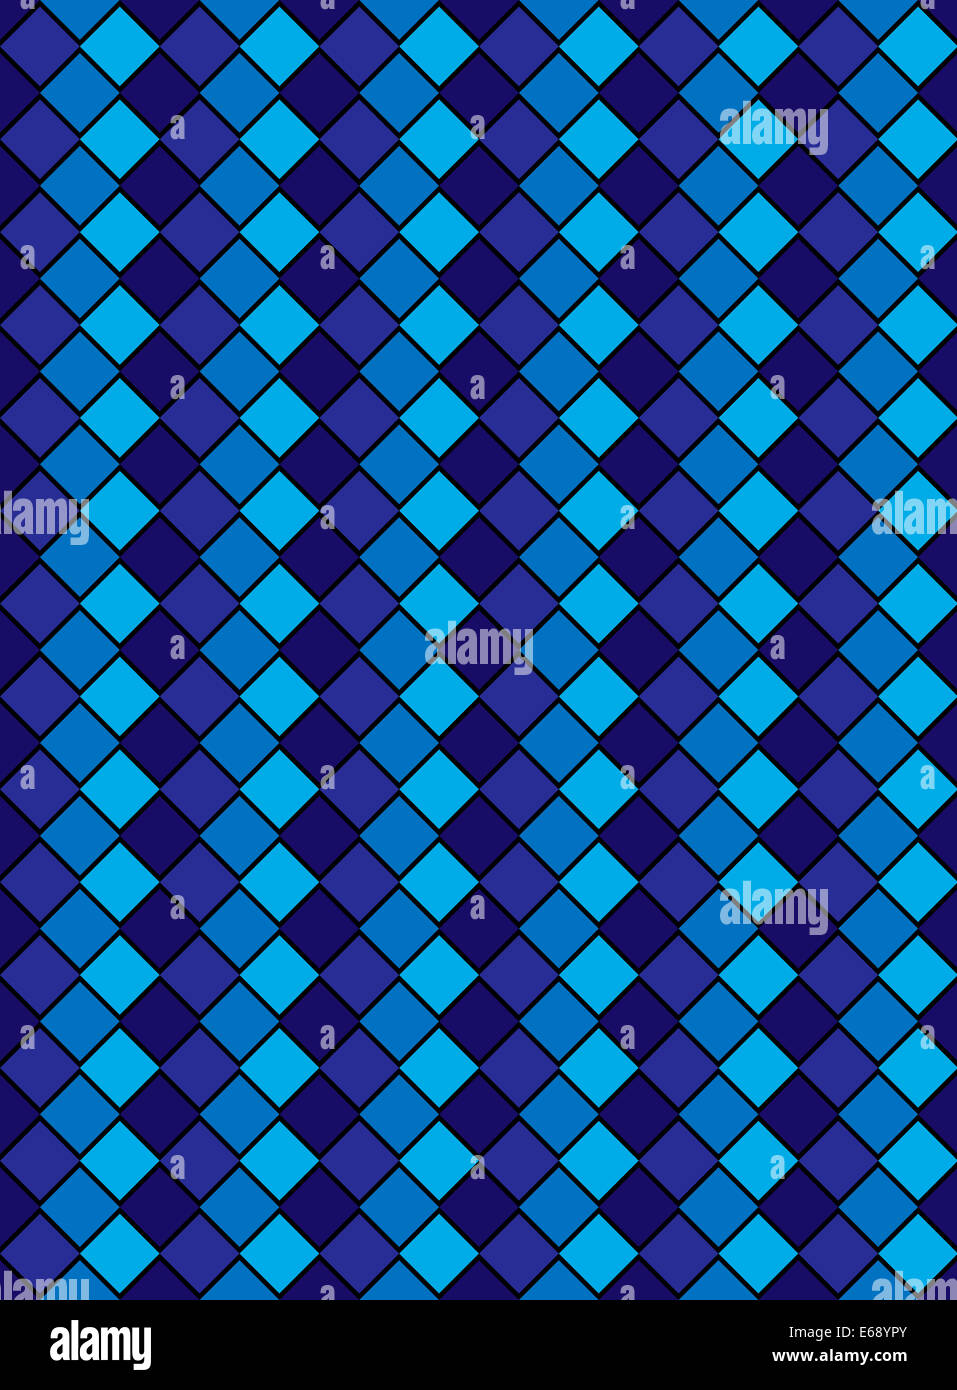 Four blue tones of variegated diamond snake style wallpaper texture pattern. Stock Photo